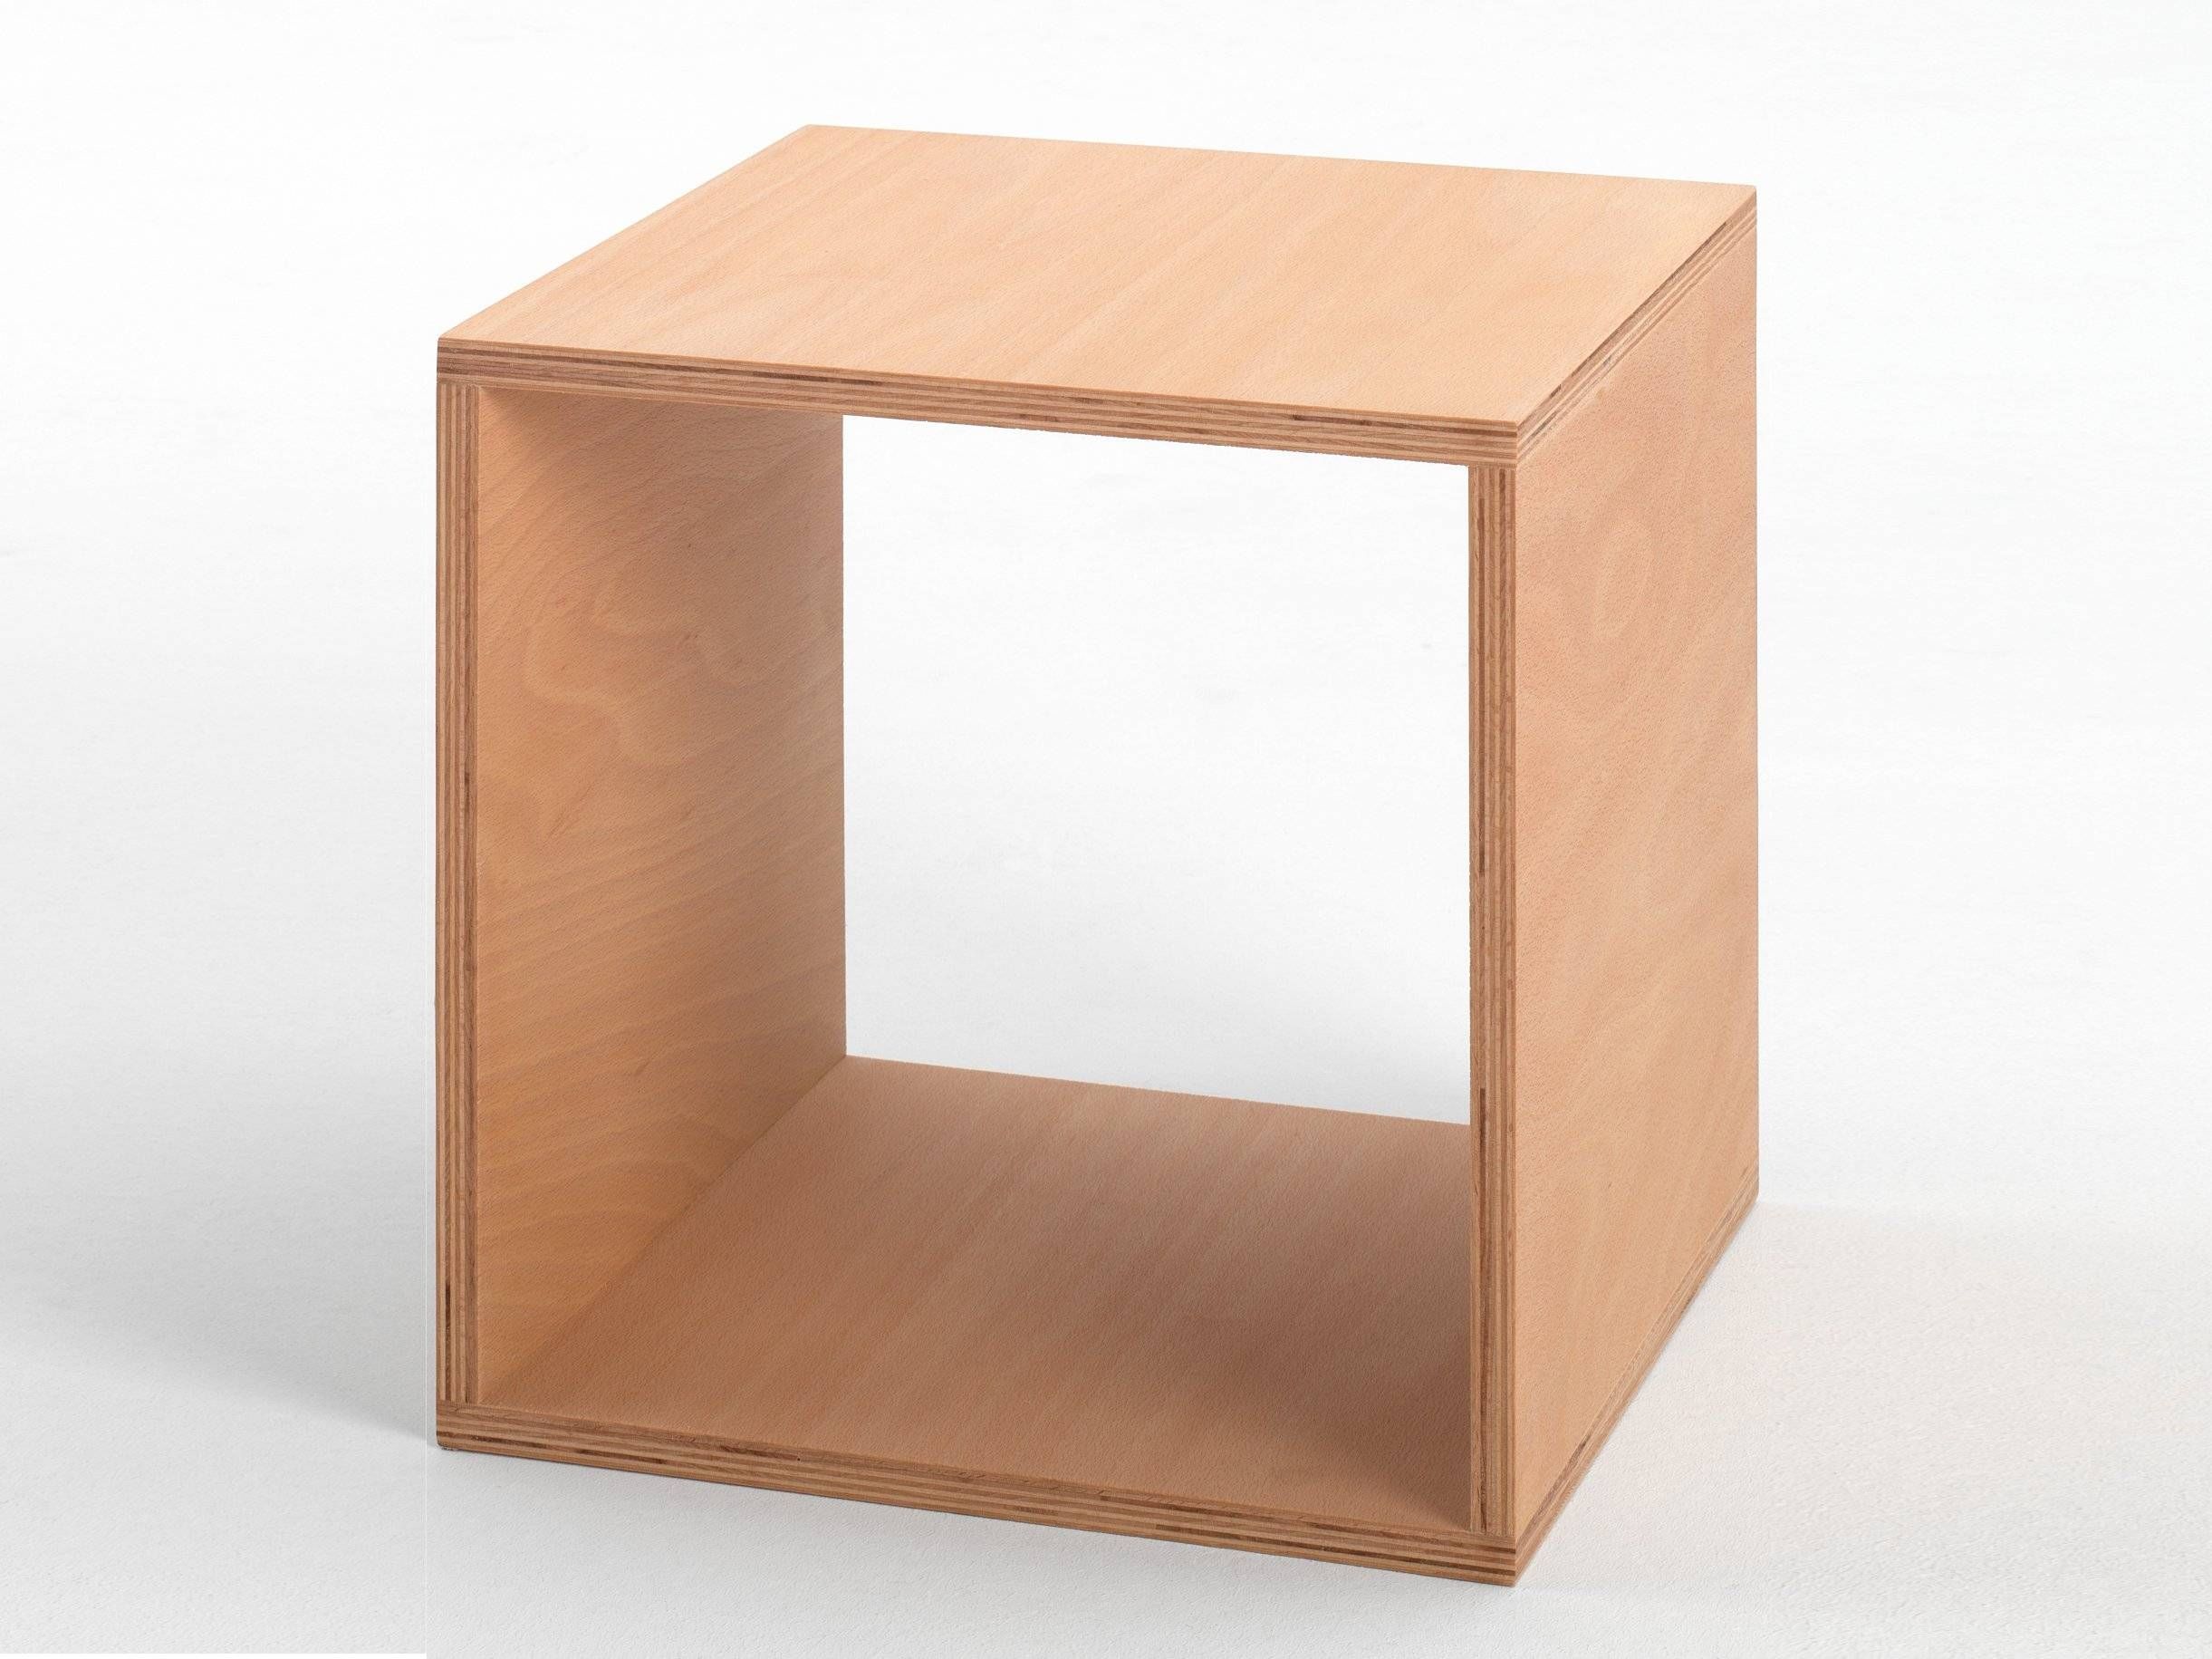 Beech Coffee Table / Bedside Table Cubetojo Möbel Intended For Beech Coffee Tables (View 8 of 30)